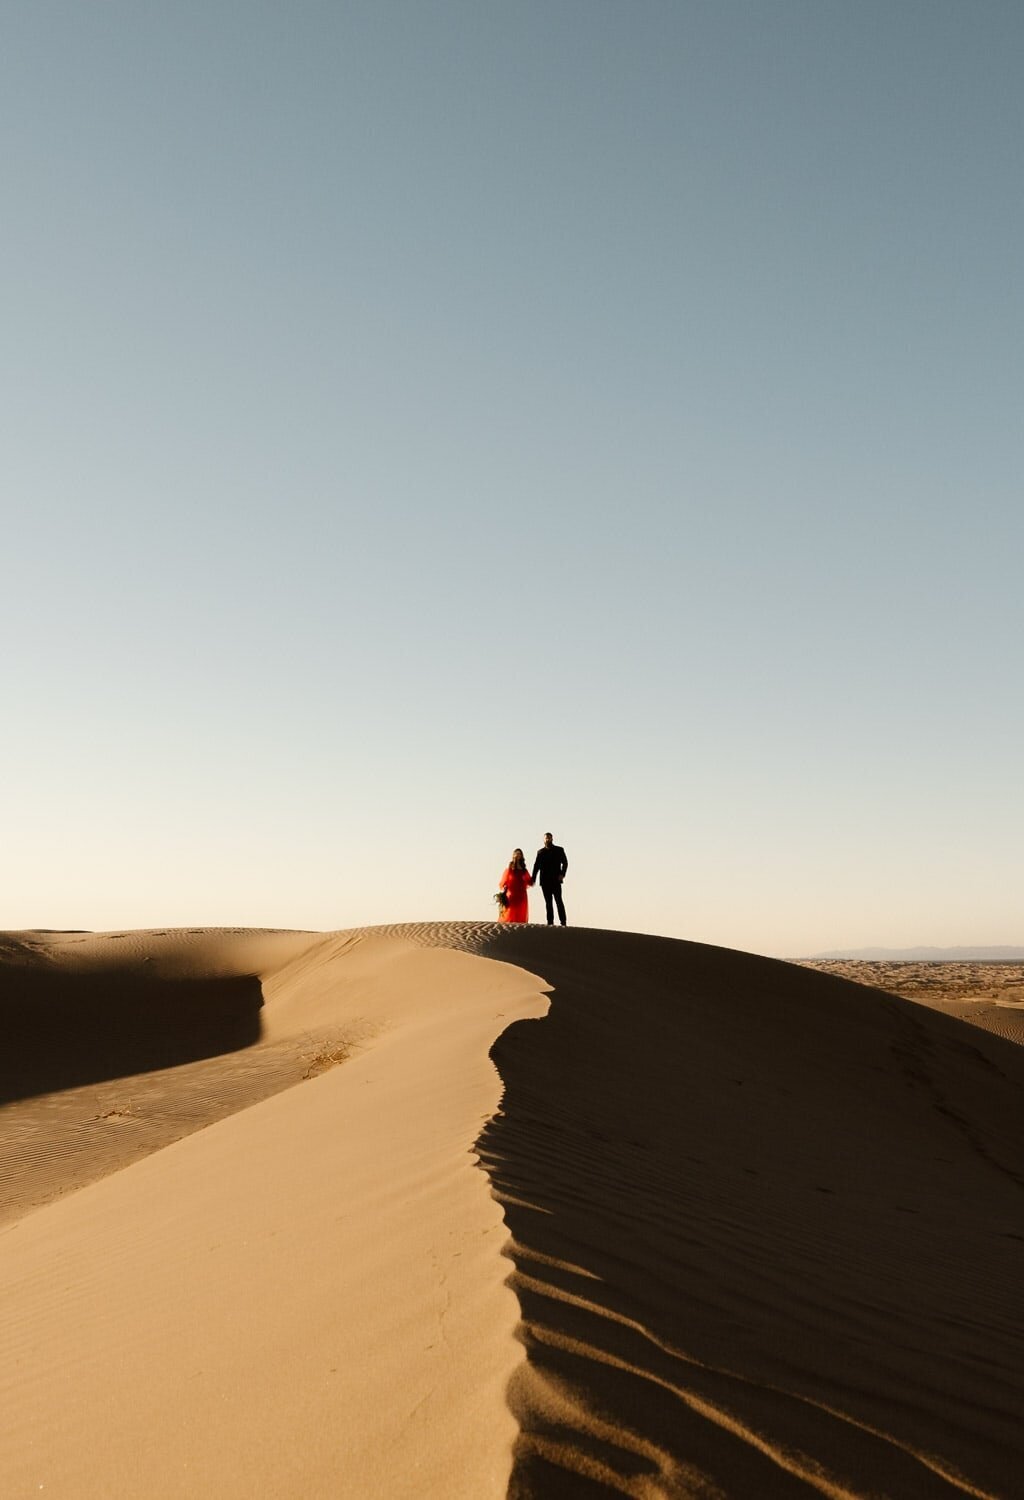 A couple stands on a ridge of the Glamis Sand Dunes, with the woman in a red dress and the man in dark attire, their silhouettes contrasting against the clear sky at dusk.